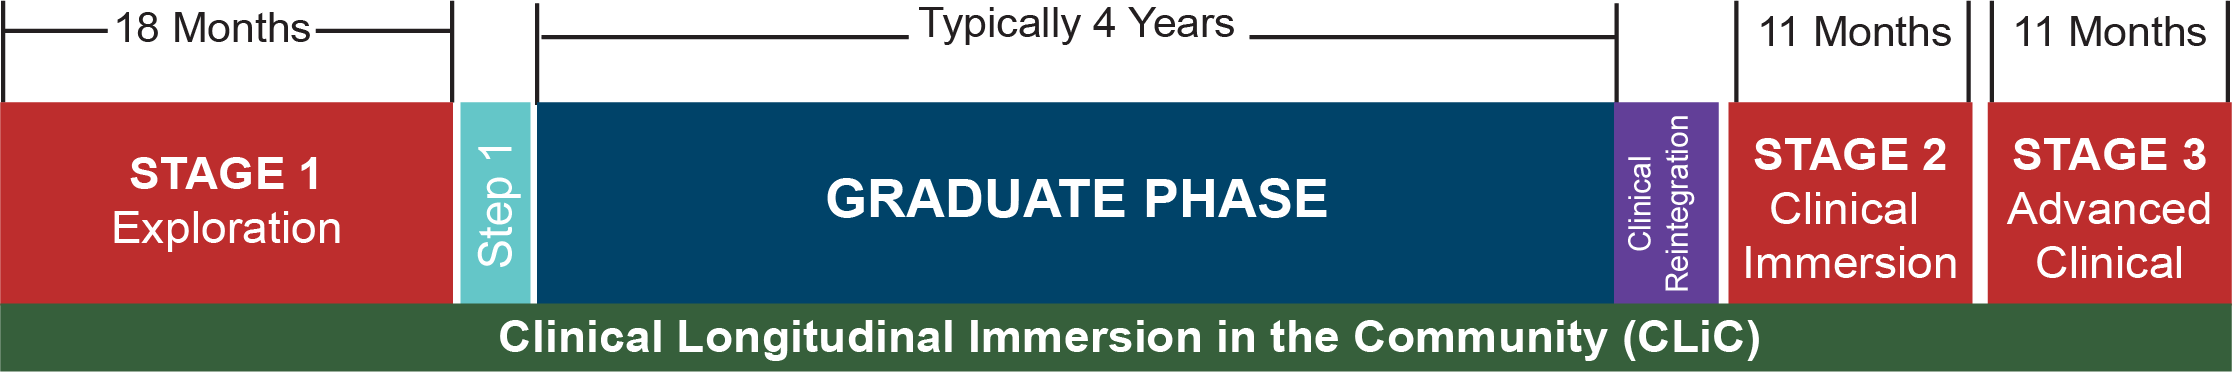 MD/PhD Program Timeline. 18 Months Stage 1 "Exploration", Step 1, Typically 4 Years Graduate Phase; Clinical Reintegration, 11 Months Stage 2 Clinical Immersion, 1 Months Stage 3 Advanced Clinical. Clinical Longitudinal Immersion in the community (CLiC) overlaps the entire timeline. 